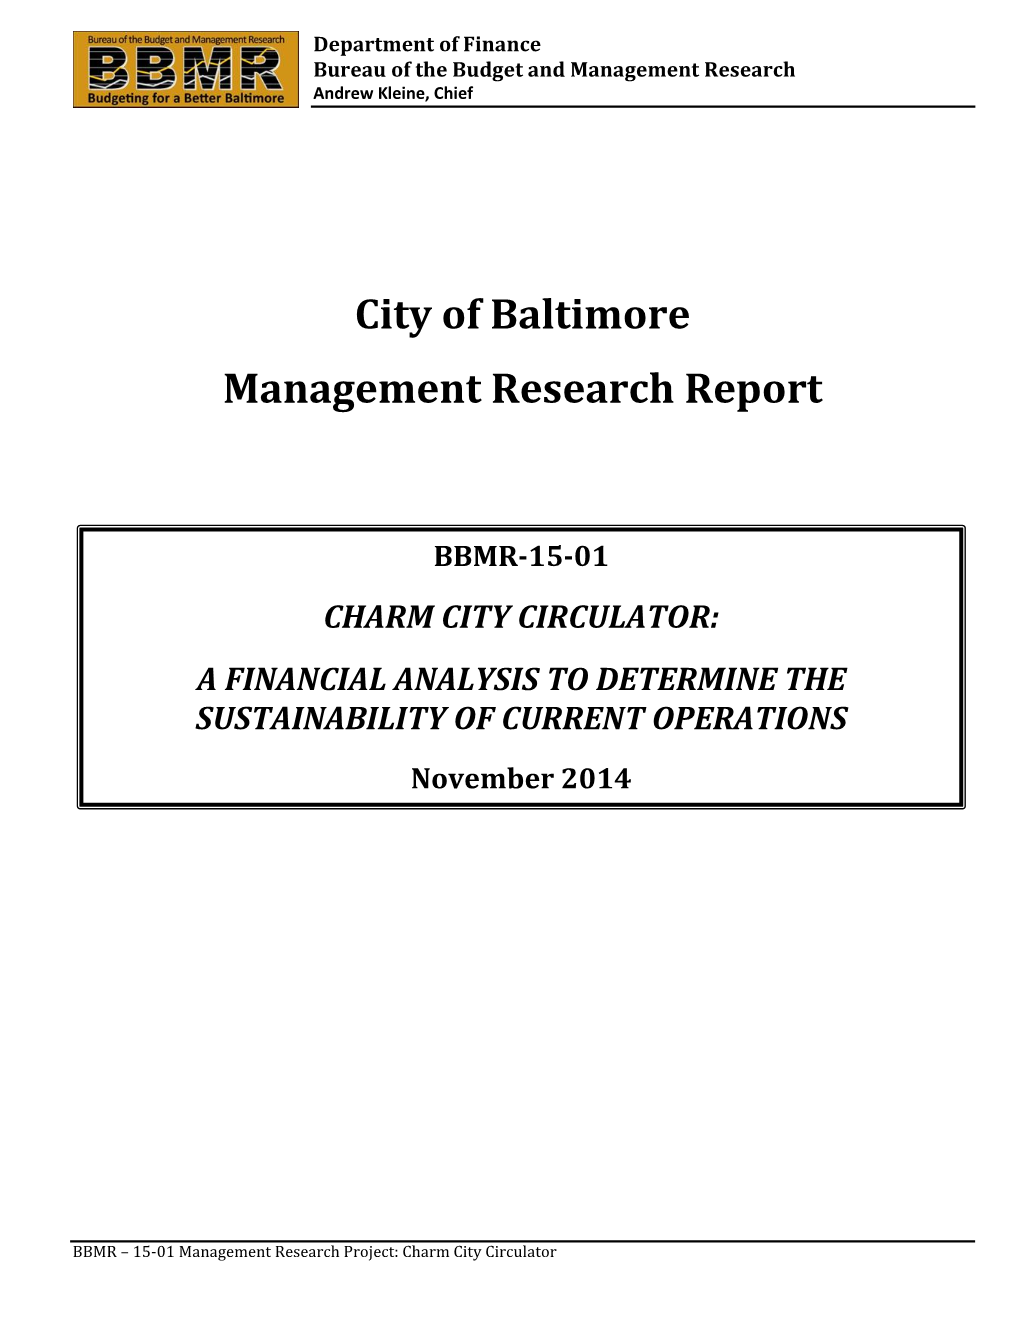 CHARM CITY CIRCULATOR: a FINANCIAL ANALYSIS to DETERMINE the SUSTAINABILITY of CURRENT OPERATIONS November 2014